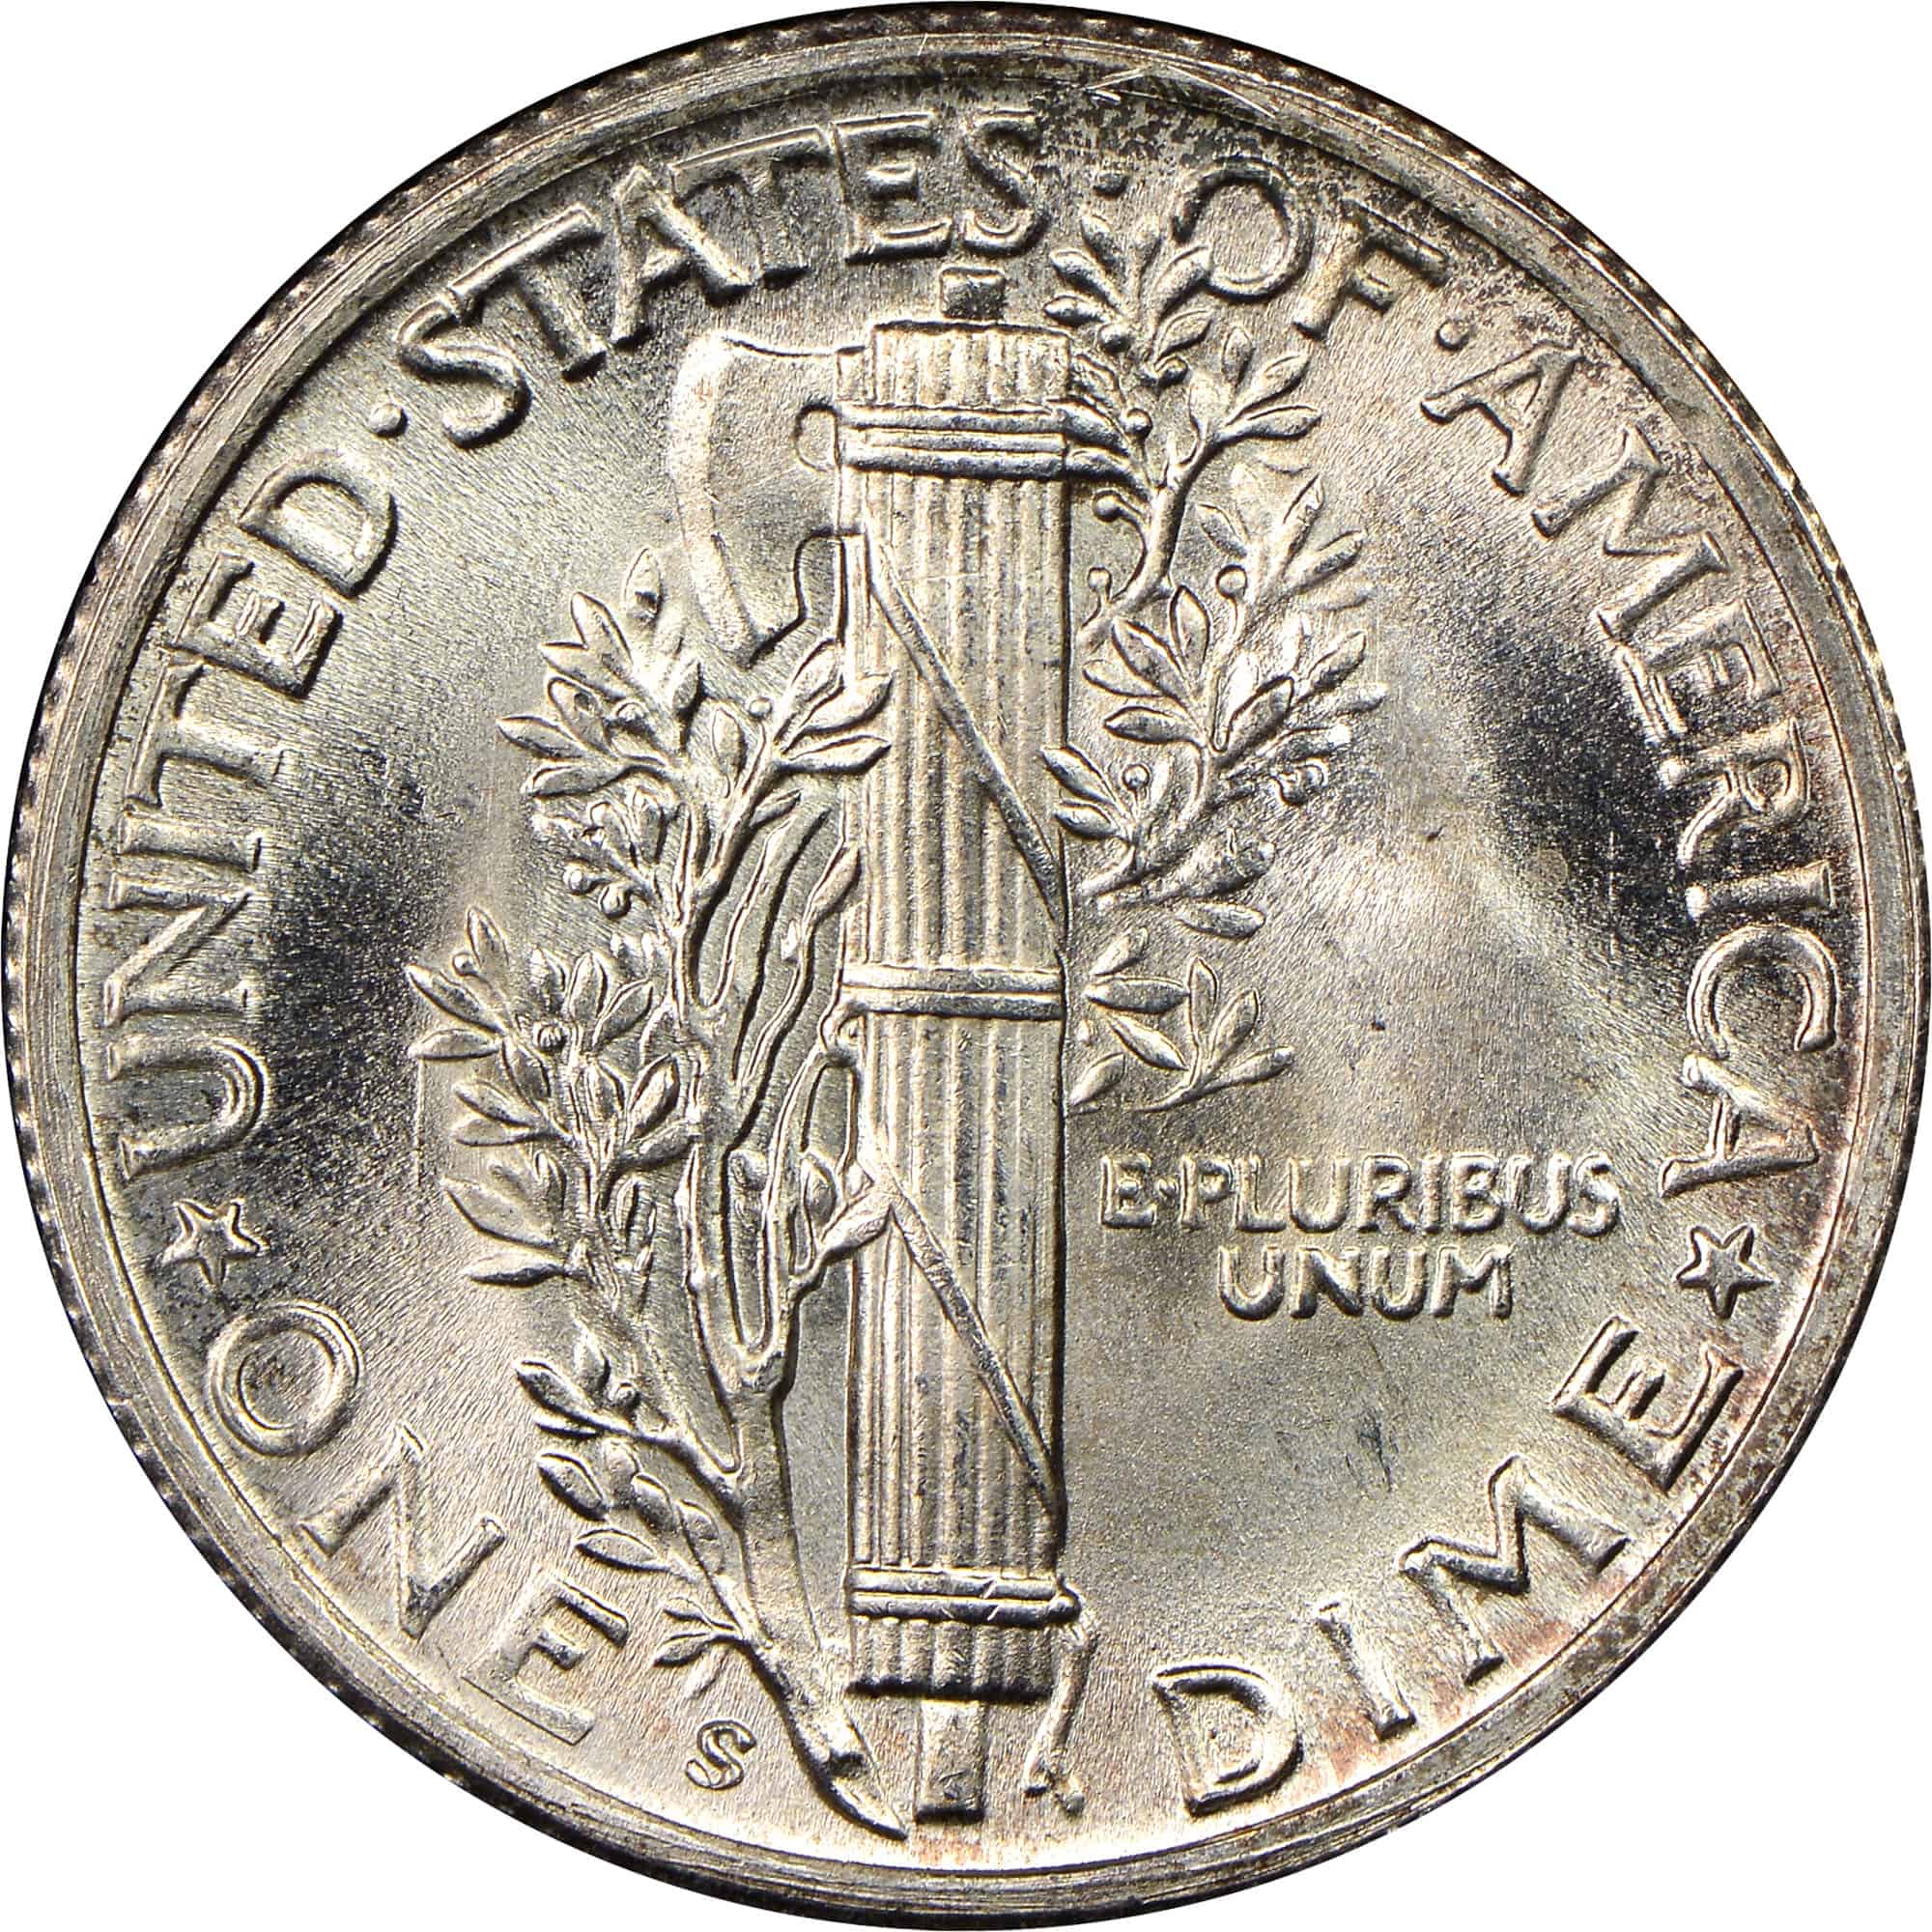 The Reverse of the 1945 Mercury Dime